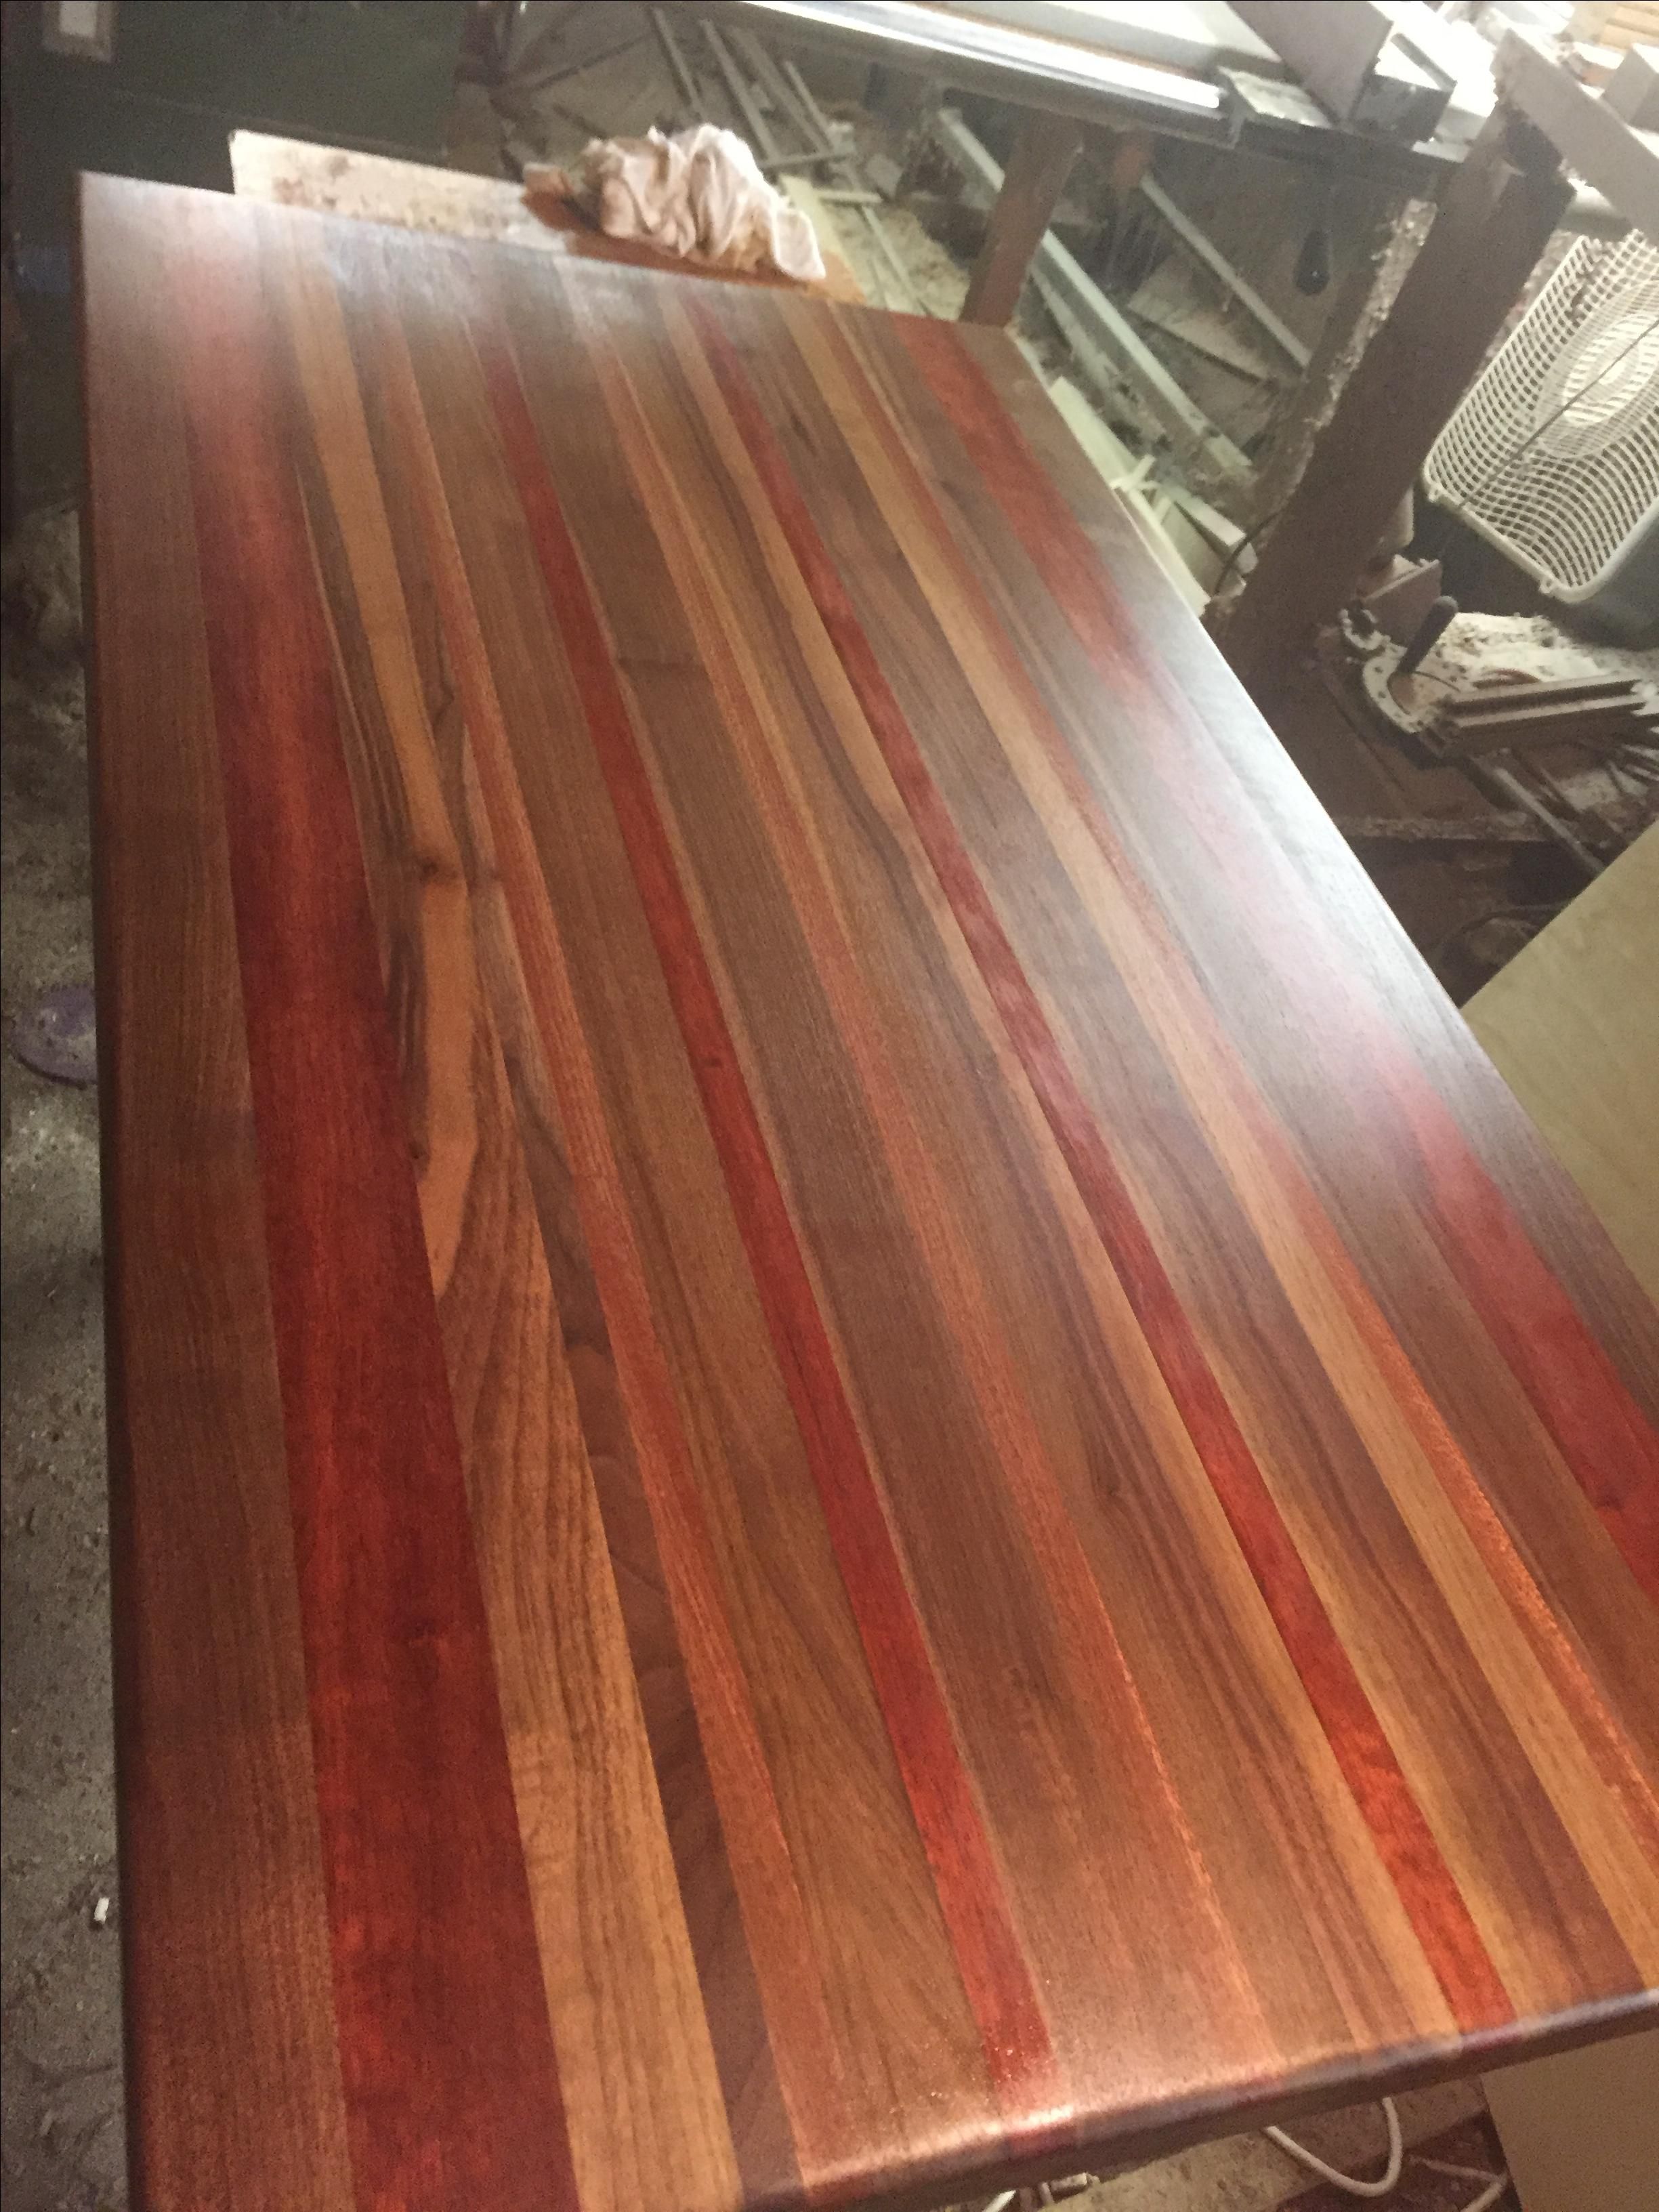 Handmade Butcher Block Cutting Boards And Counter Tops By Cooper